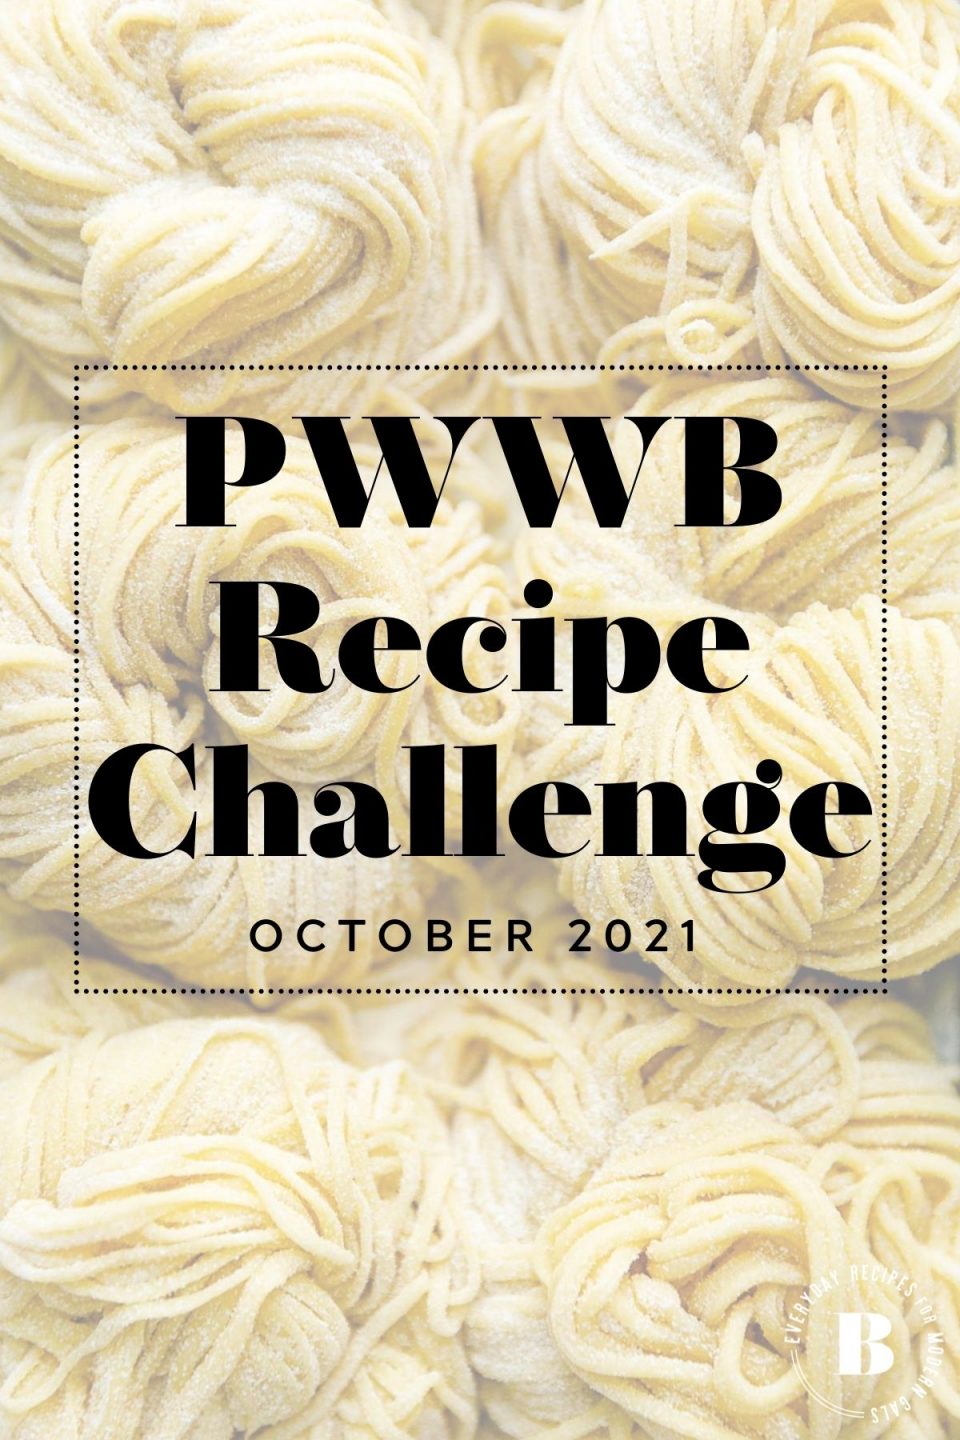 Fresh pasta with graphic text overlay 'PWWB Recipe Challenge October 2021'